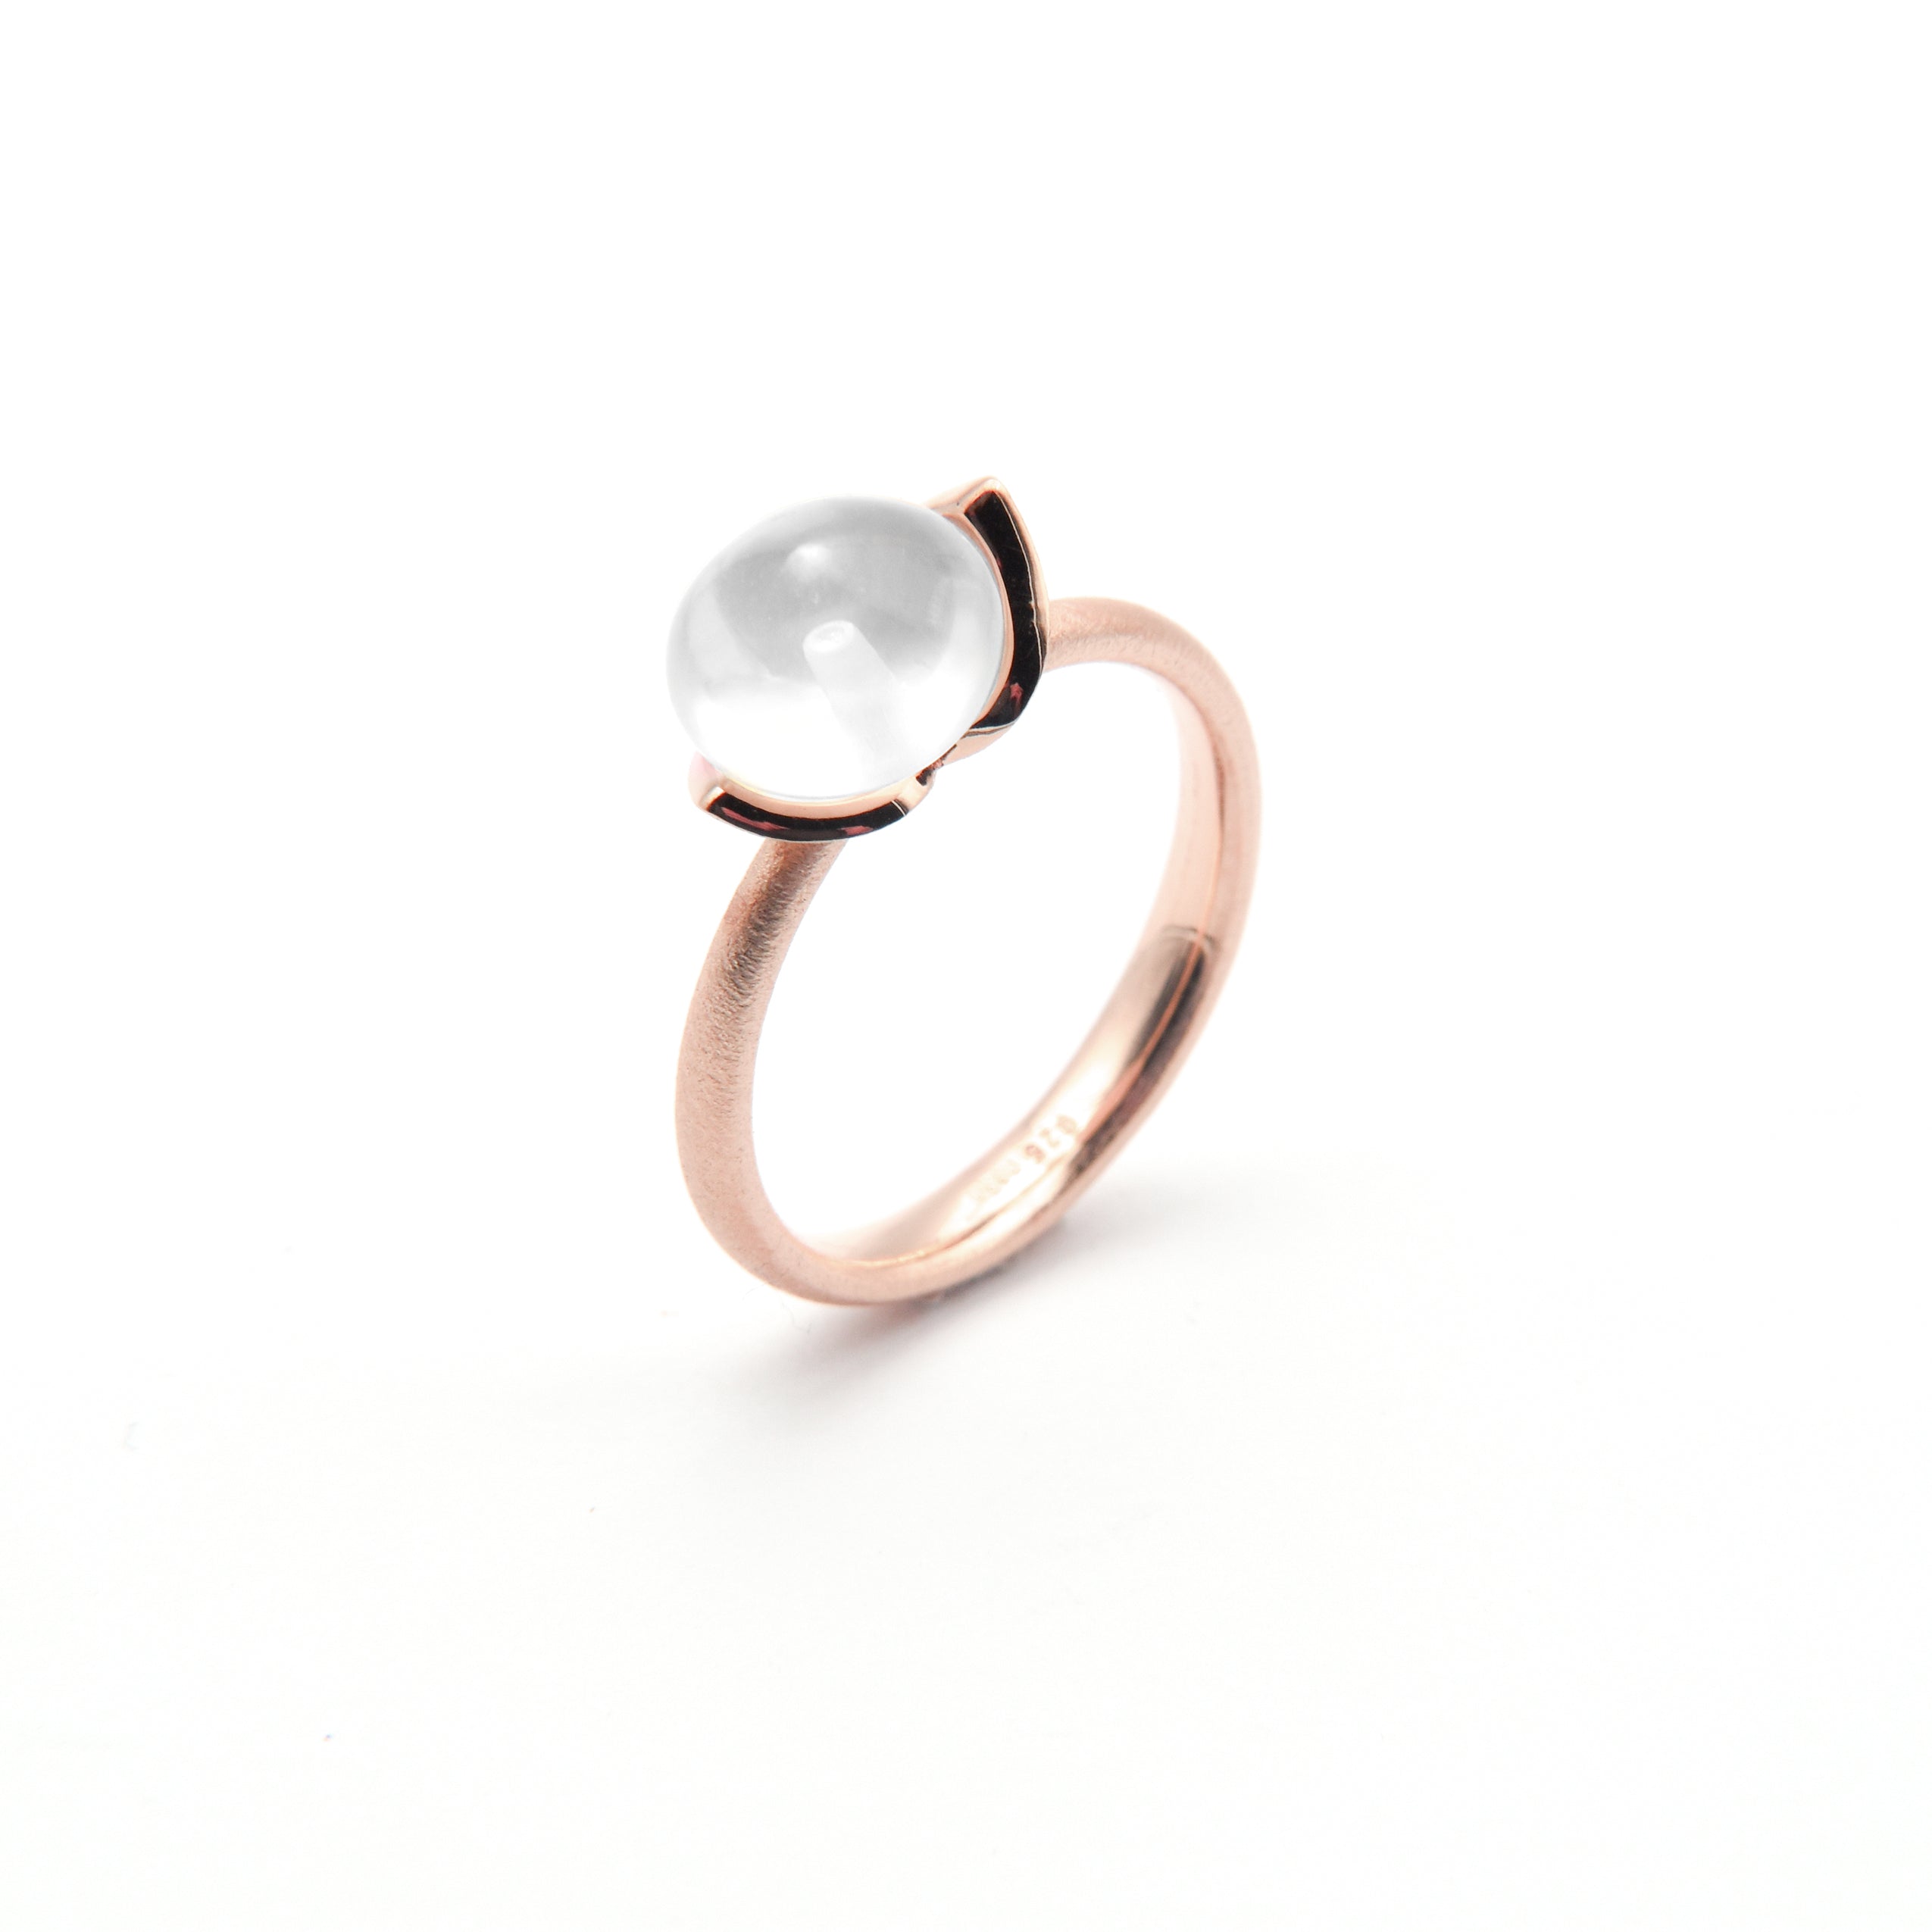 Dolce Ring "smal" mit Milchquarz 925/-